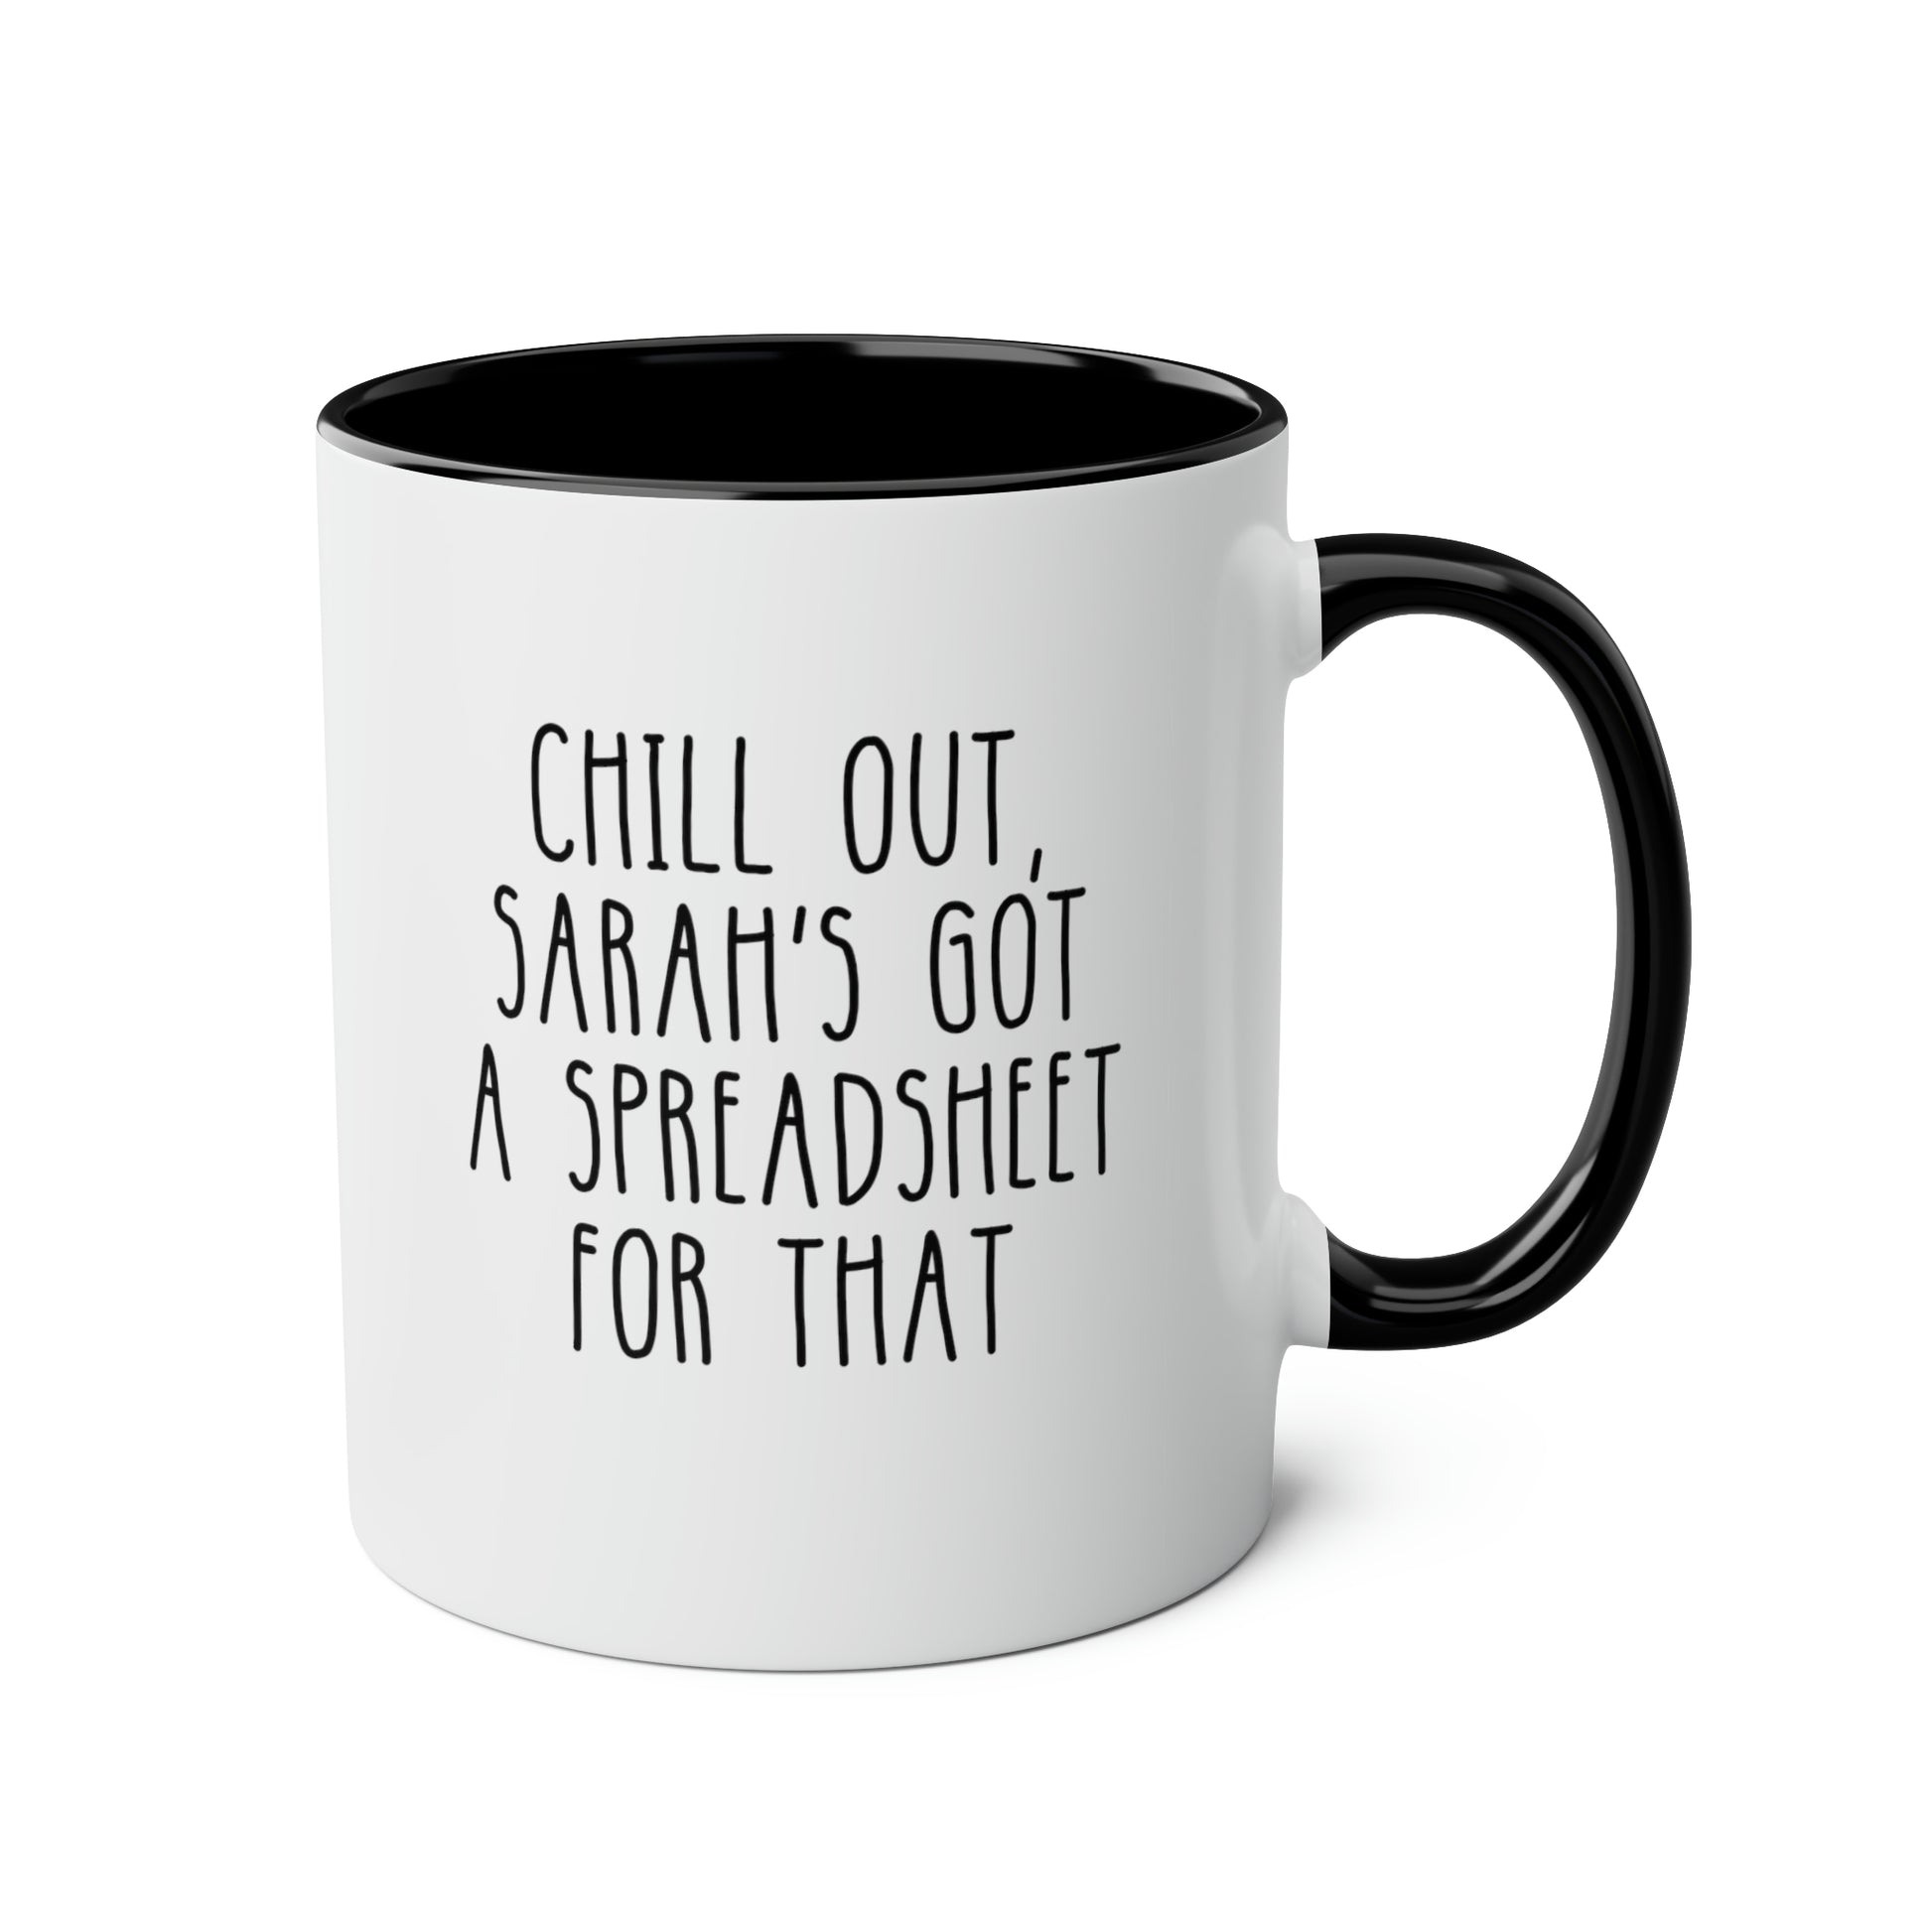 Chill Out Got A Spreadsheet For That 11oz white with black accent funny large coffee mug gift for accountant work waveywares wavey wares wavywares wavy wares